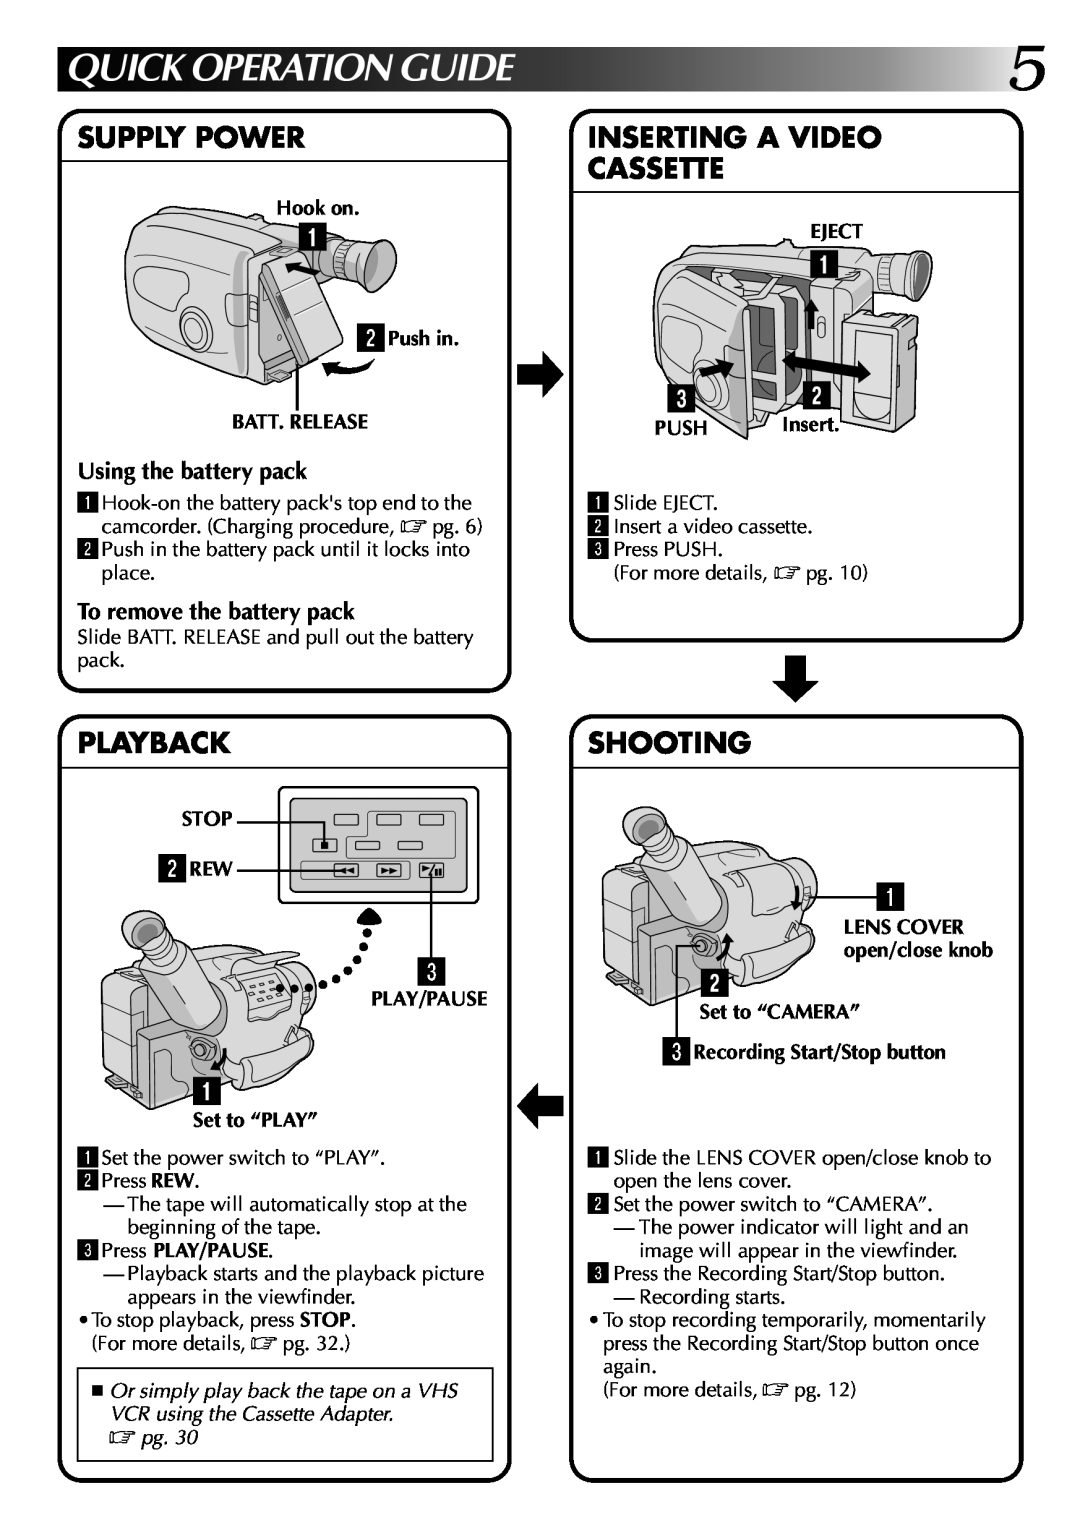 JVC LYT0002-048A Quick Operation Guide, Supply Power, Inserting A Video Cassette, Playback, Shooting, Hook on, Eject 